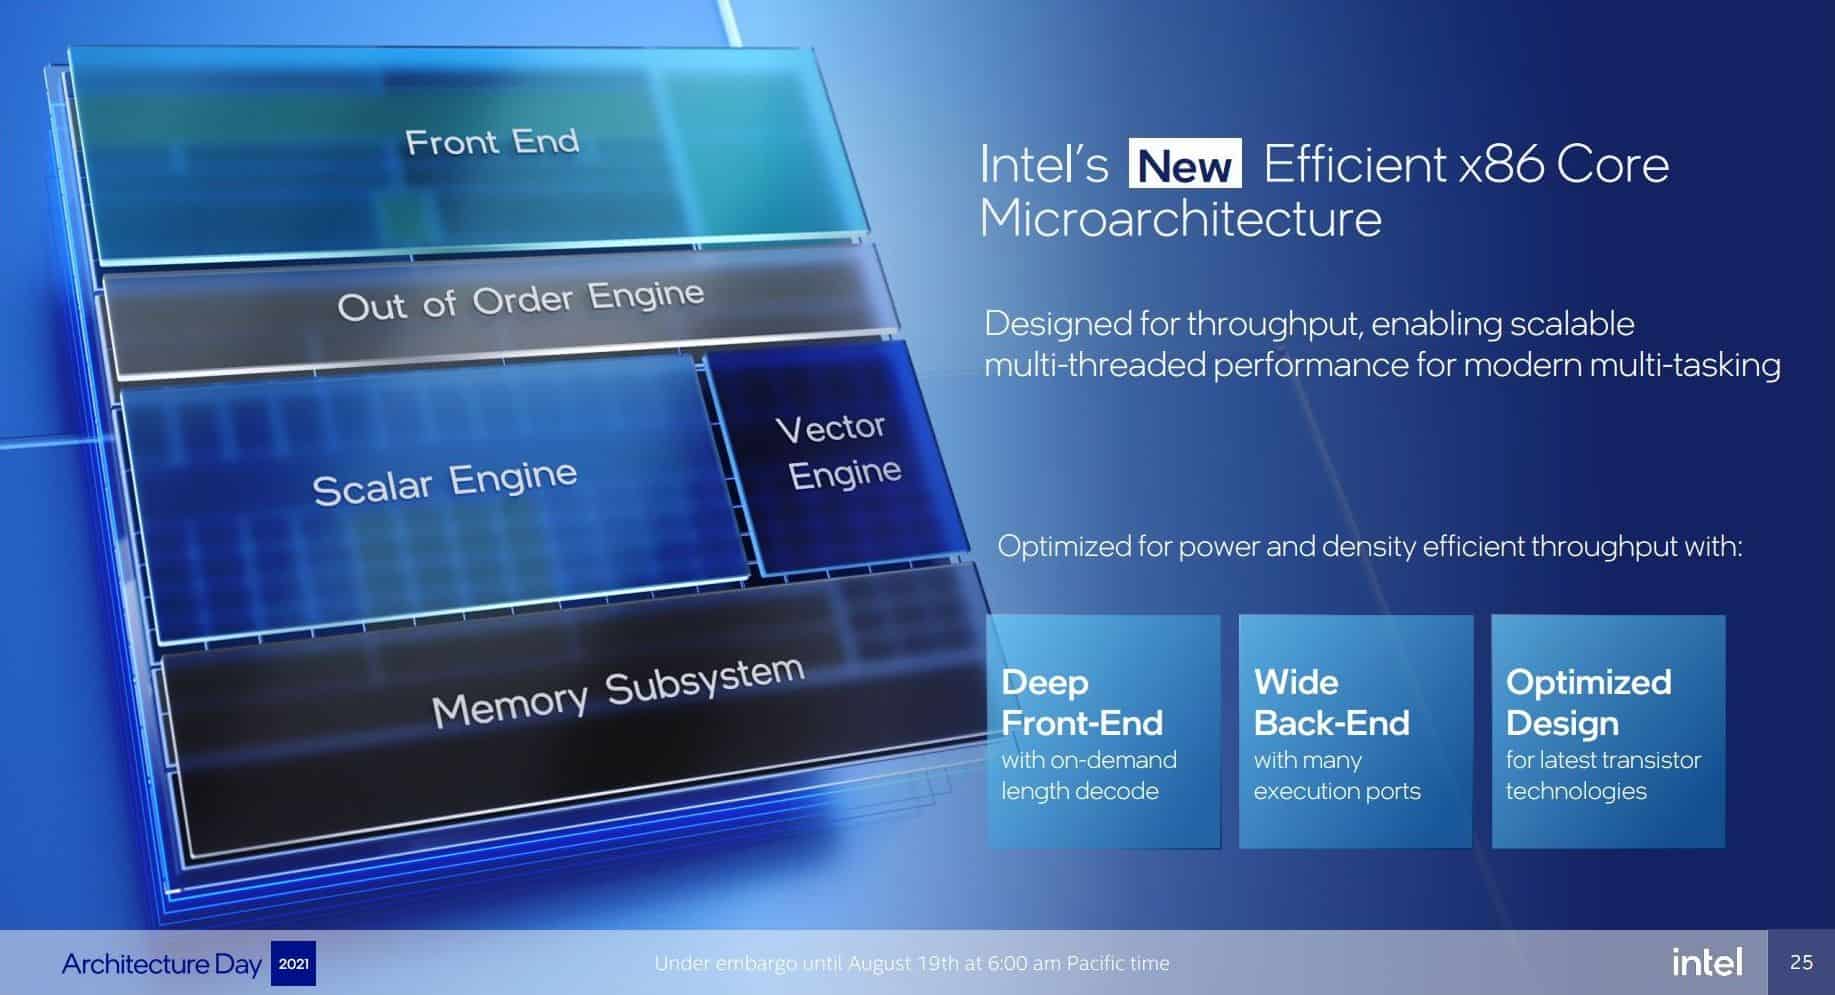 This image outlines the key specification of Intel's Efficient Core Microarchitecture